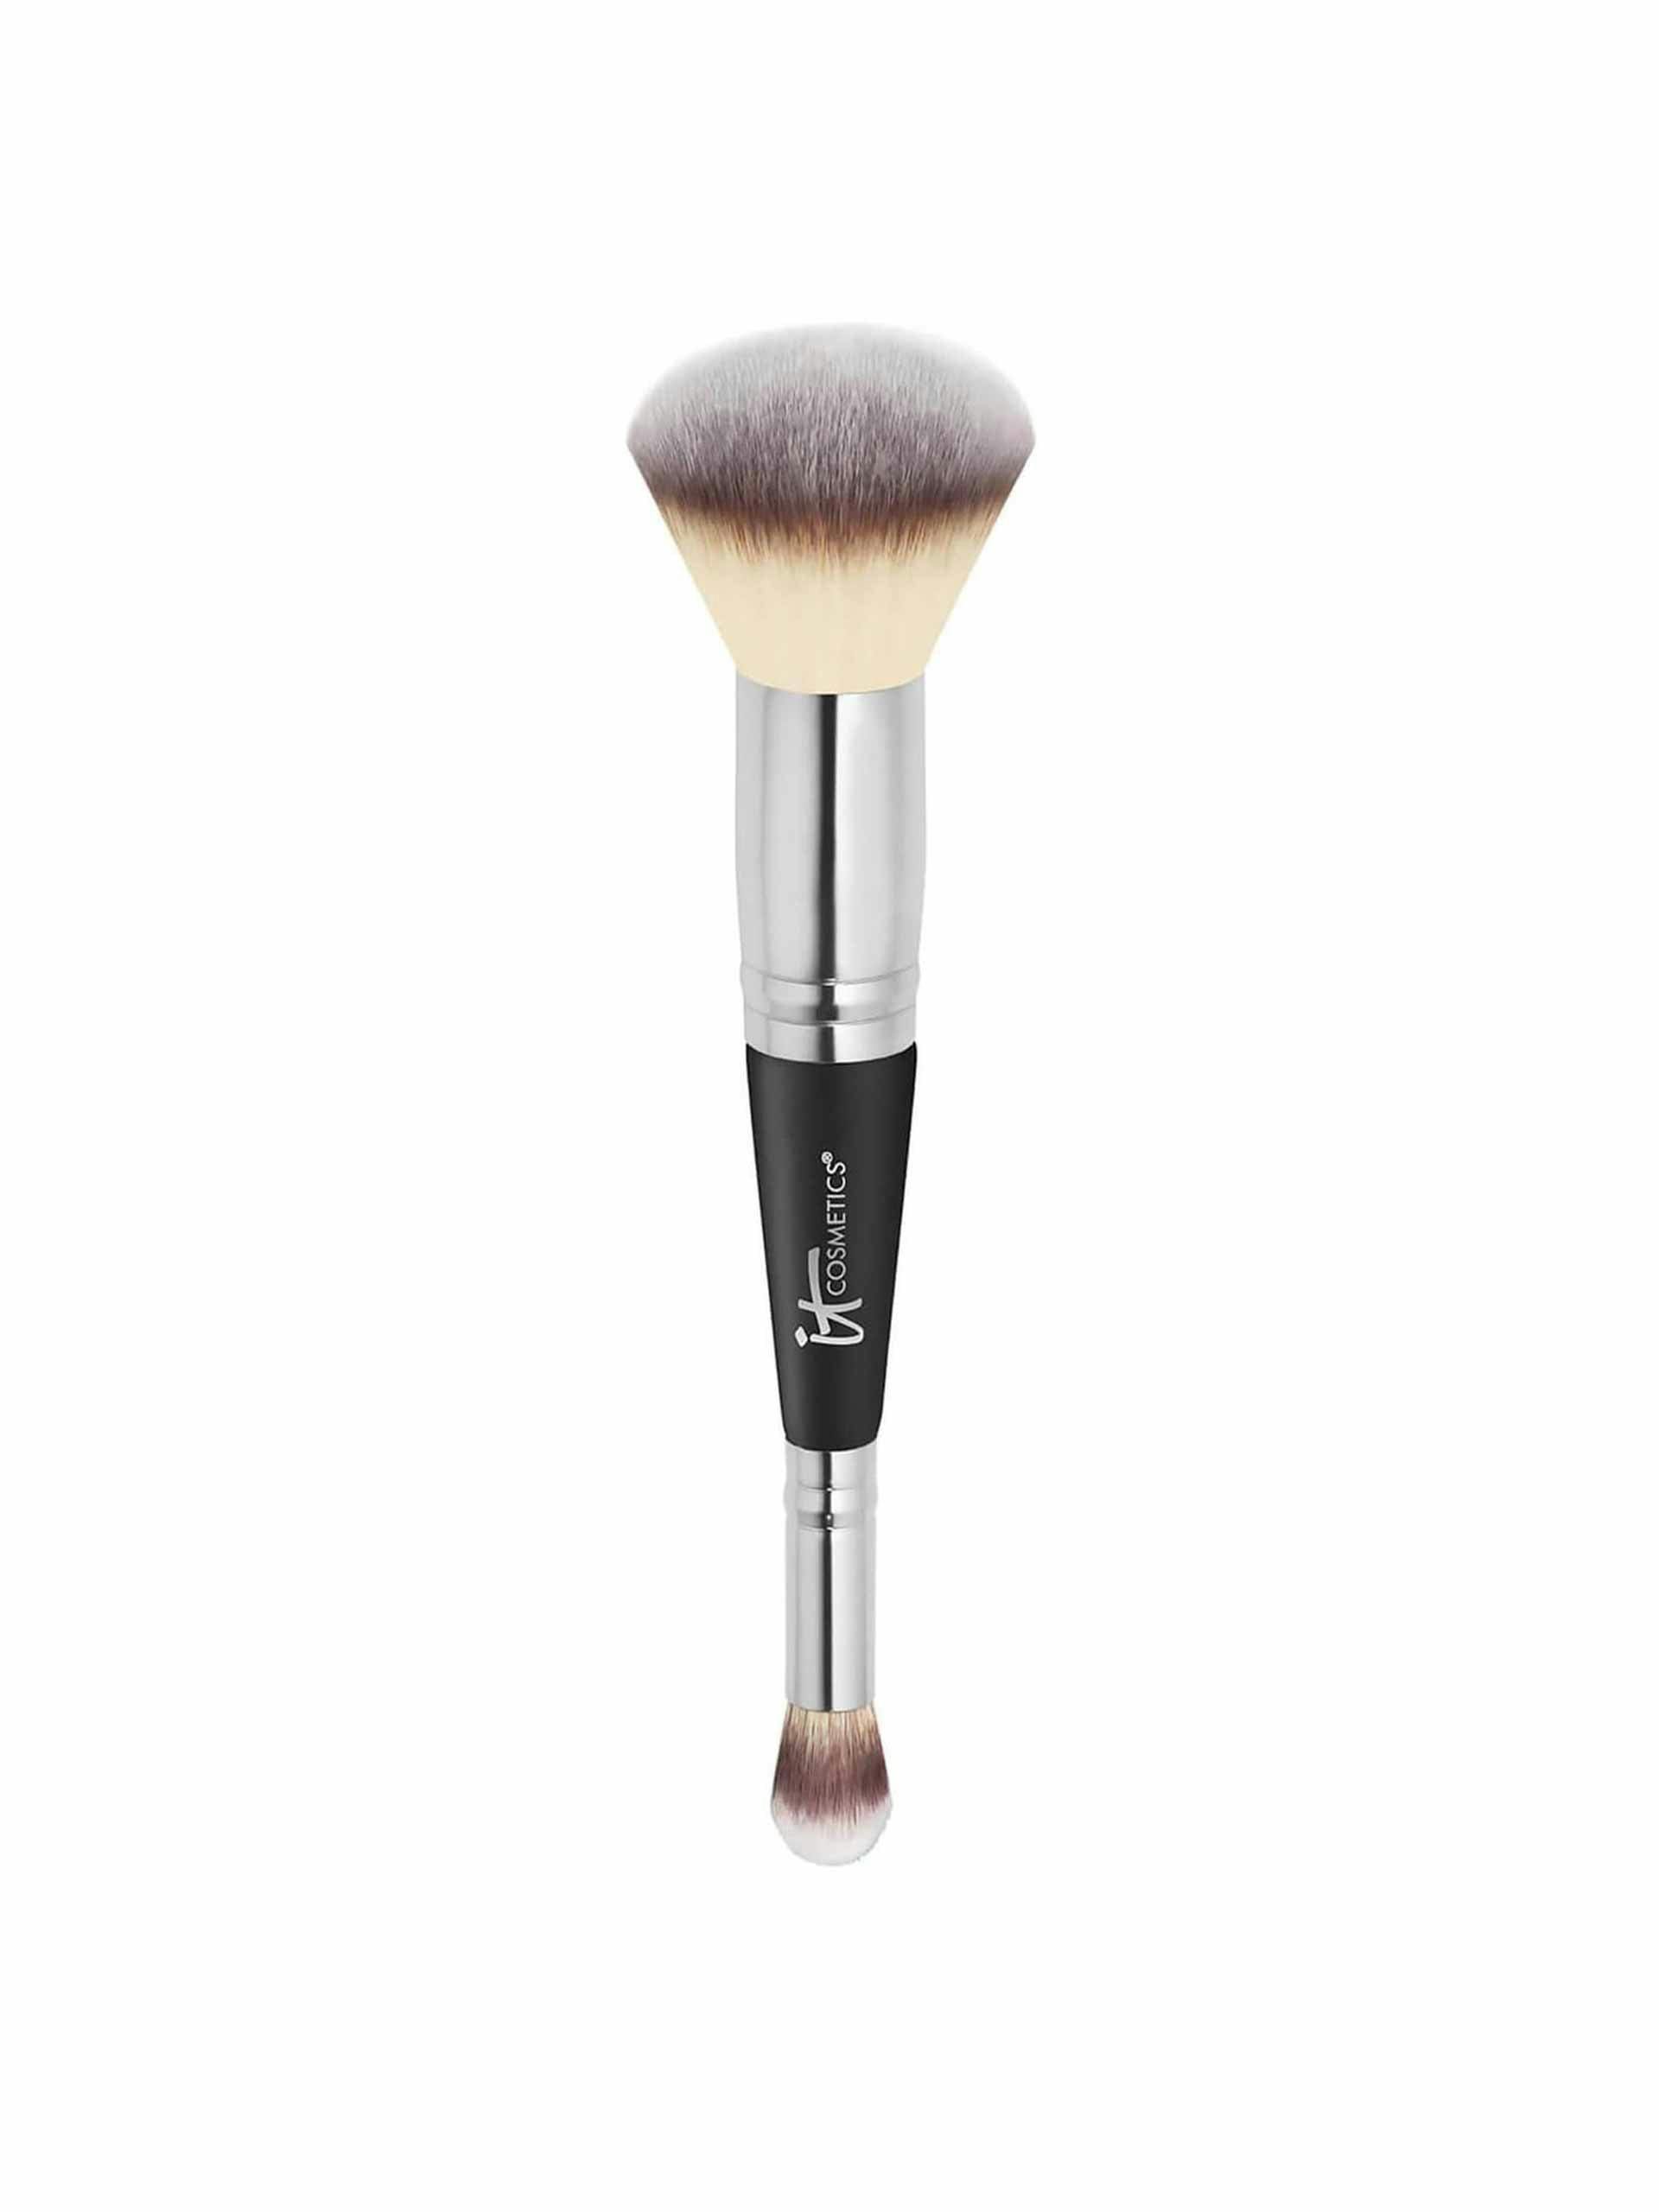 Heavenly Luxe complexion perfection brush